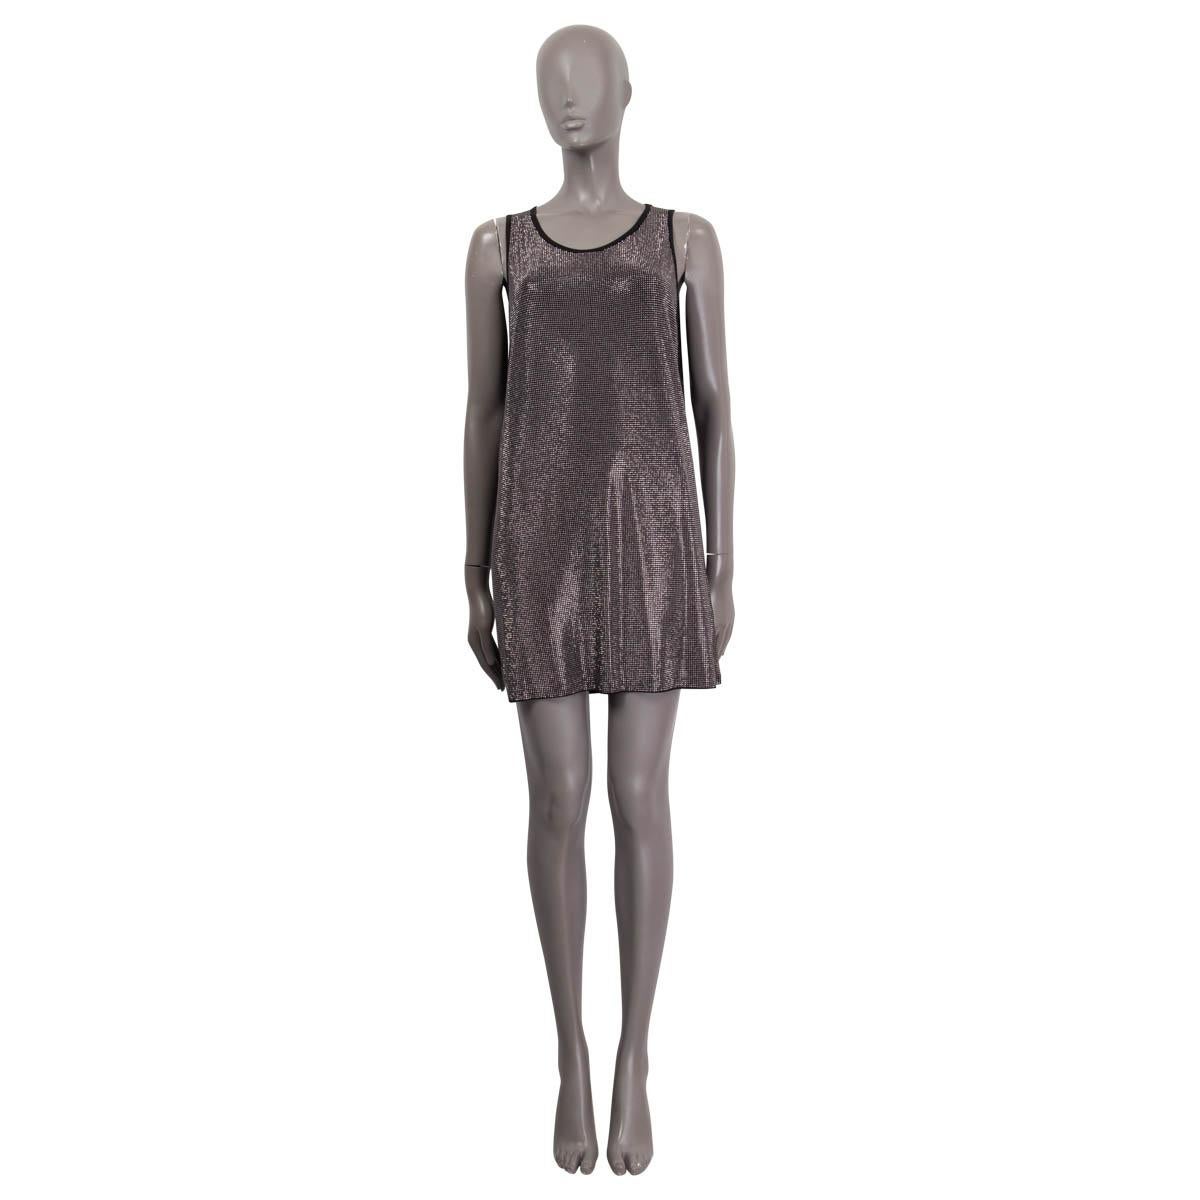 100% authentic Pierre Balmain studded mini dress in black viscose (92%) and spandex (8%). Unlined. Has been worn and is in excellent condition.

Measurements
Tag Size	XS
Size	XS
Shoulder Width	31cm (12.1in)
Bust	96cm (37.4in) to 120cm